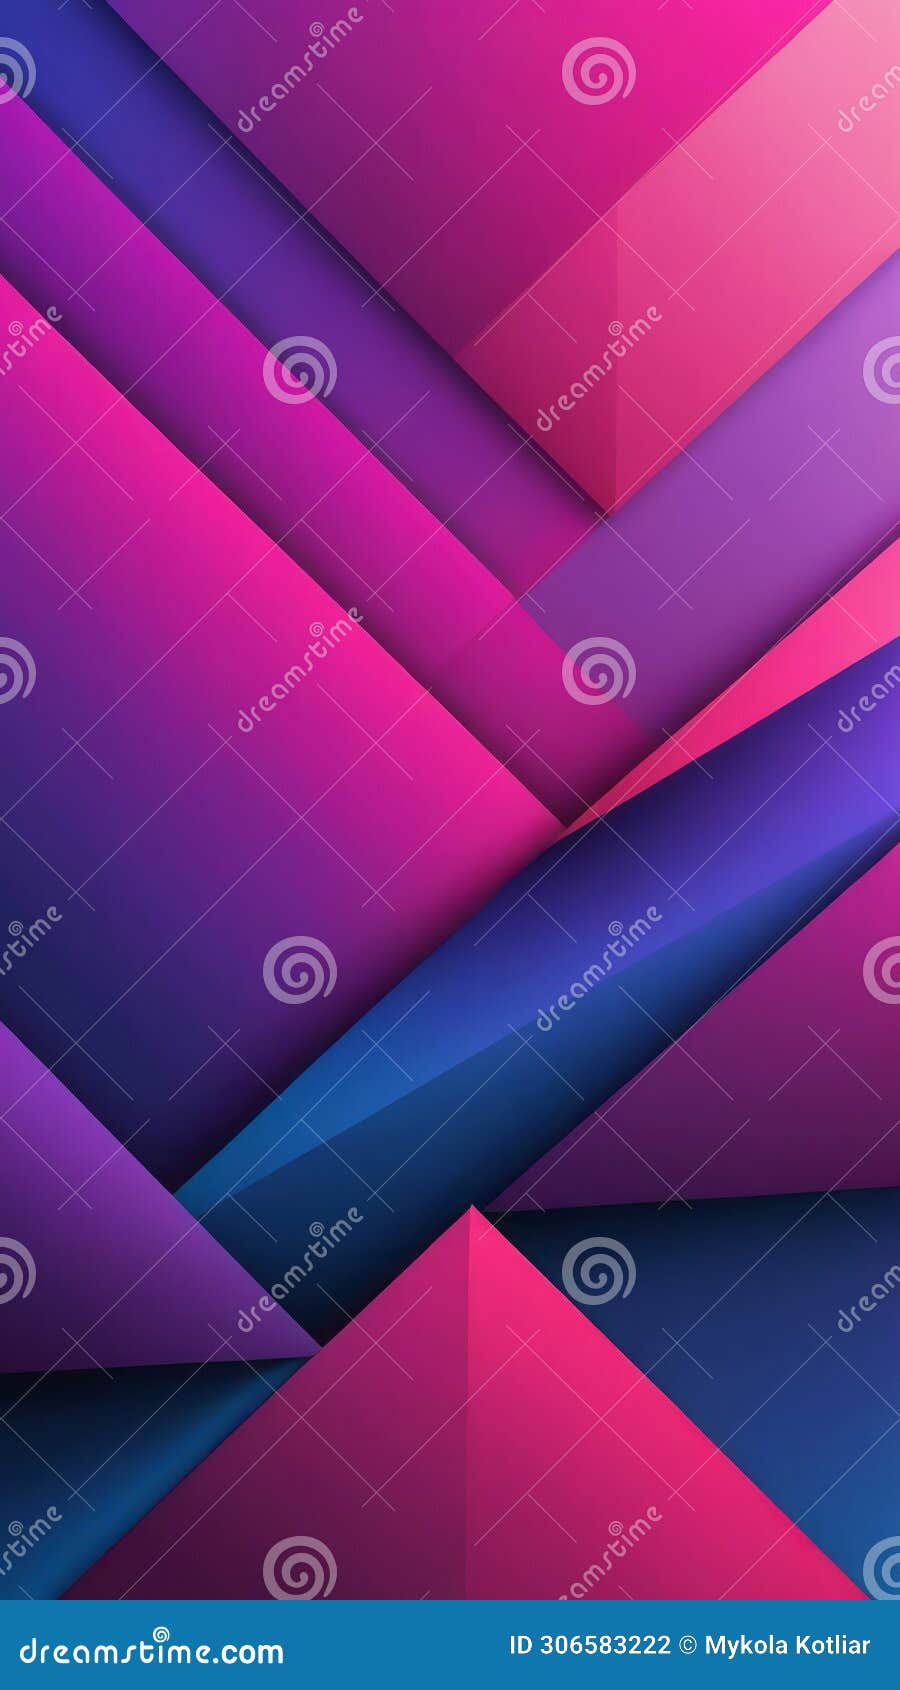 screen background from trapezoidal and fuchsia